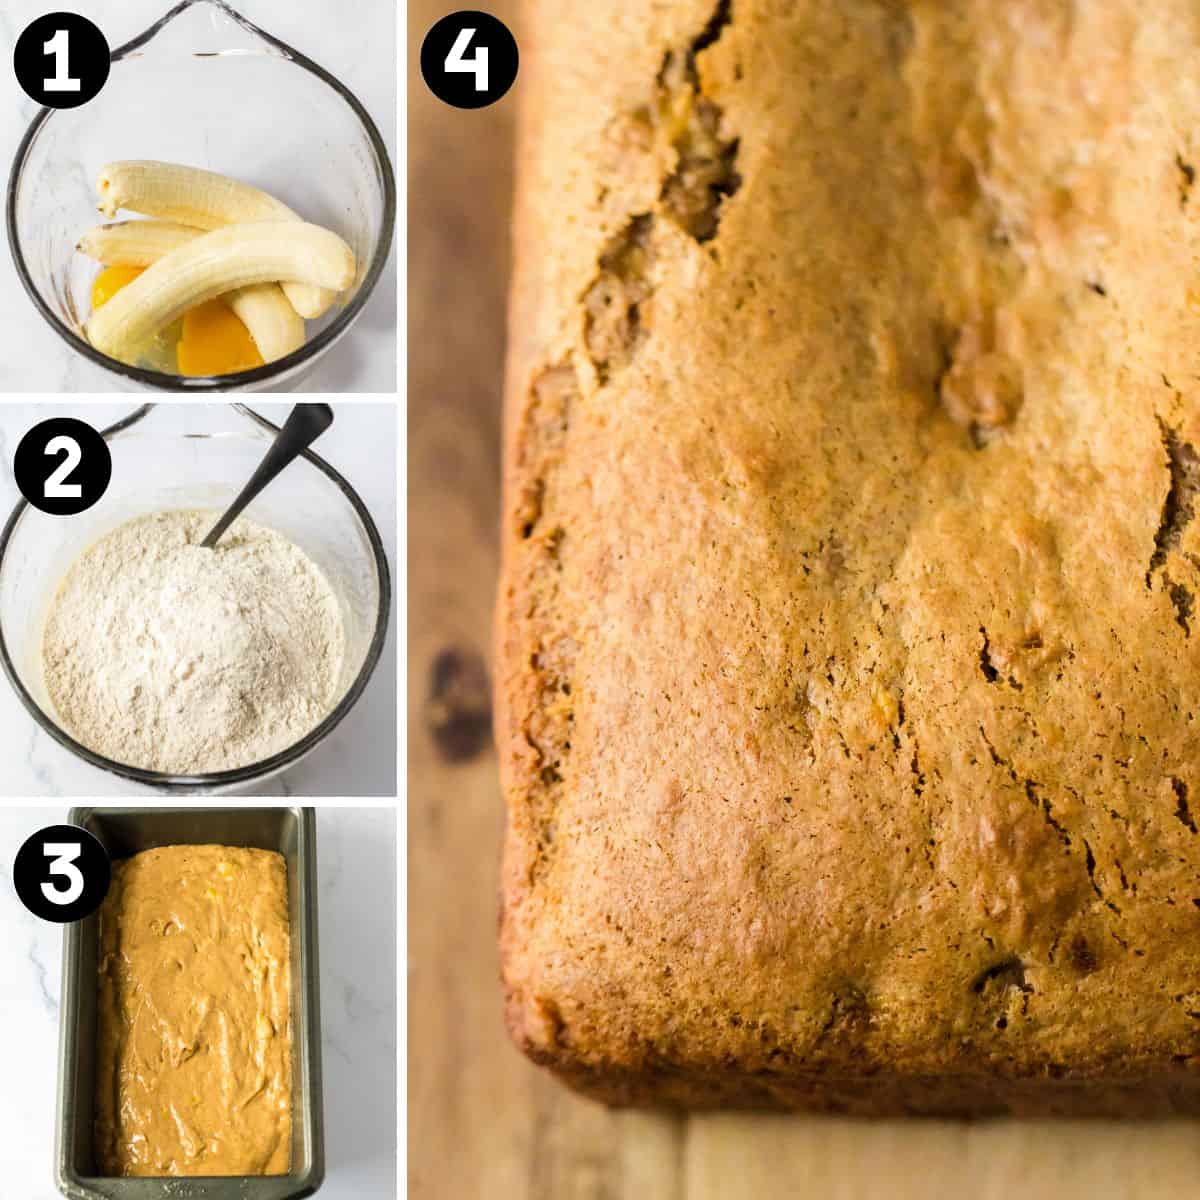 Four image collage. 1: bananas and eggs in glass bowl. 2: cake mix added to bowl. 3: batter in loaf pan. 4: baked banana bread.